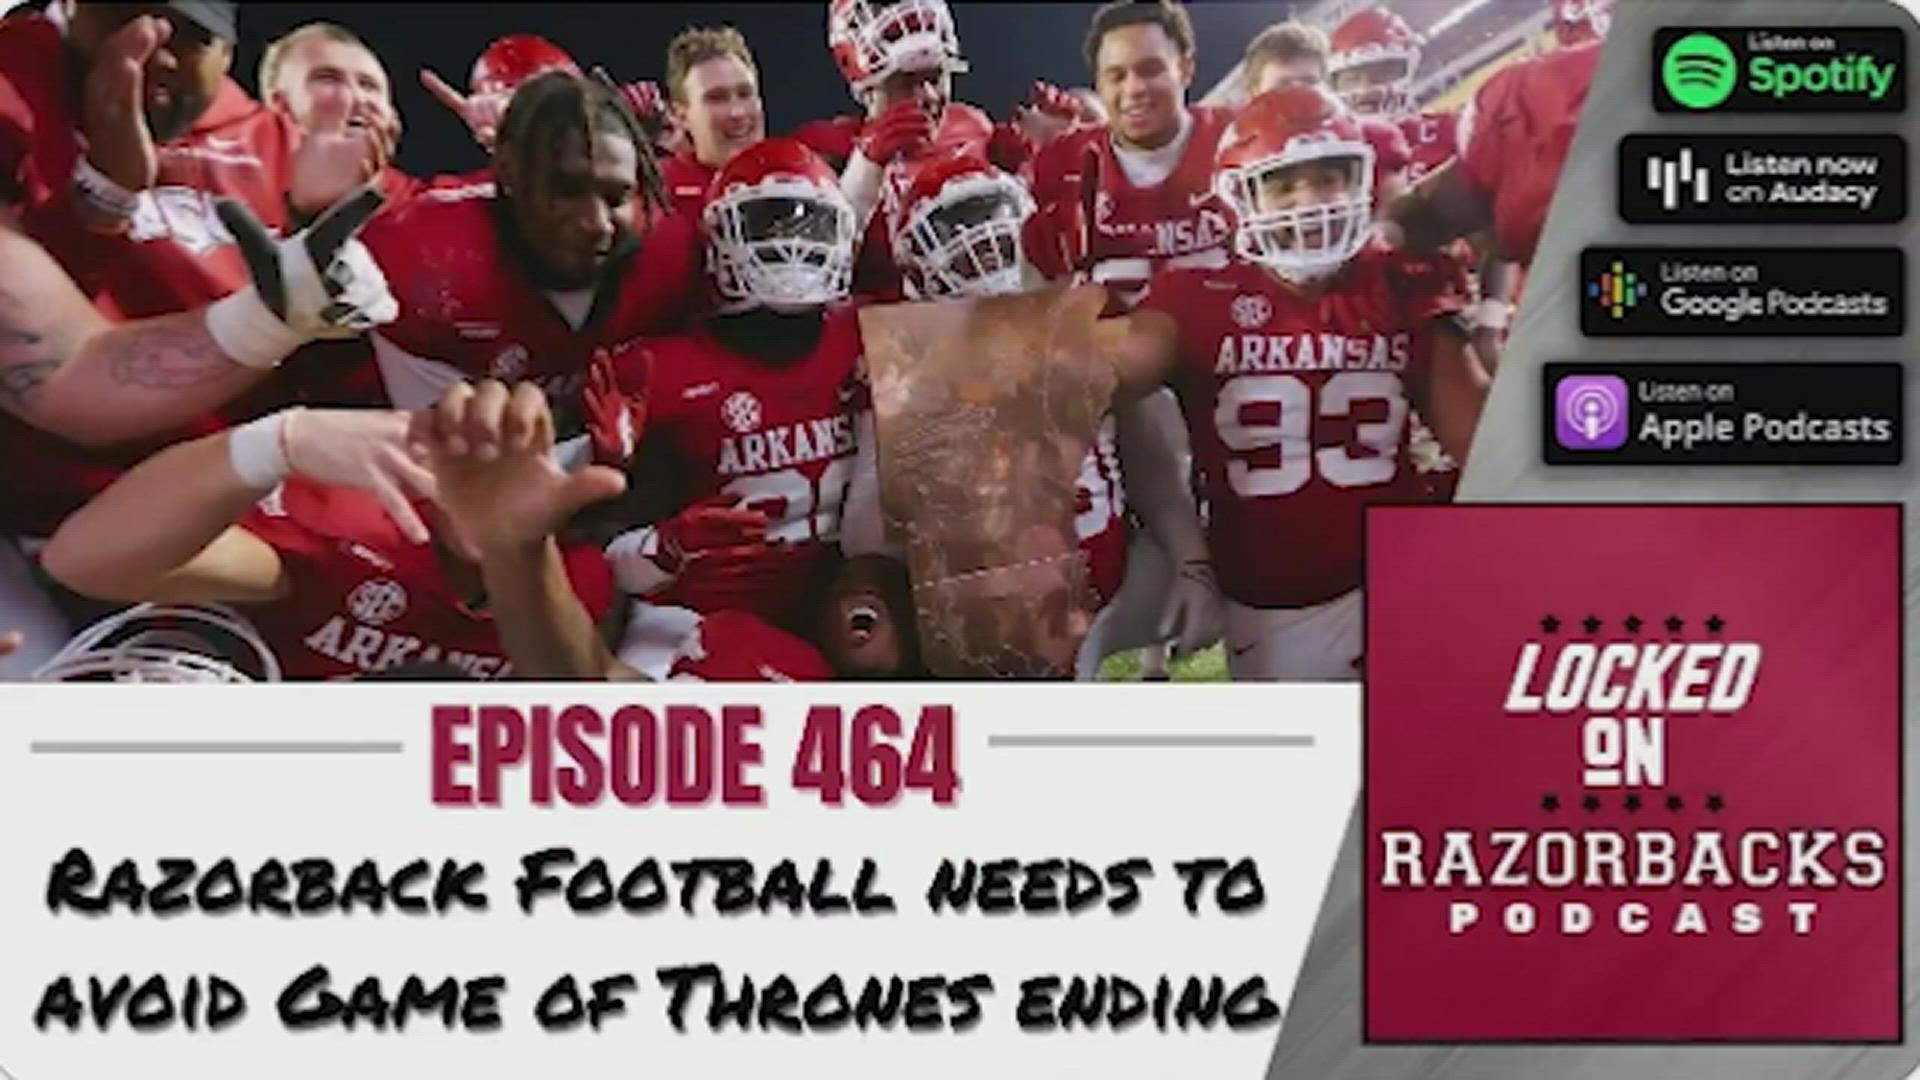 Arkansas needs to avoid a Game of Thrones ending and the Hogs look to take home Hall of Fame Classic Trophy tonight. All that and more on episode 464.